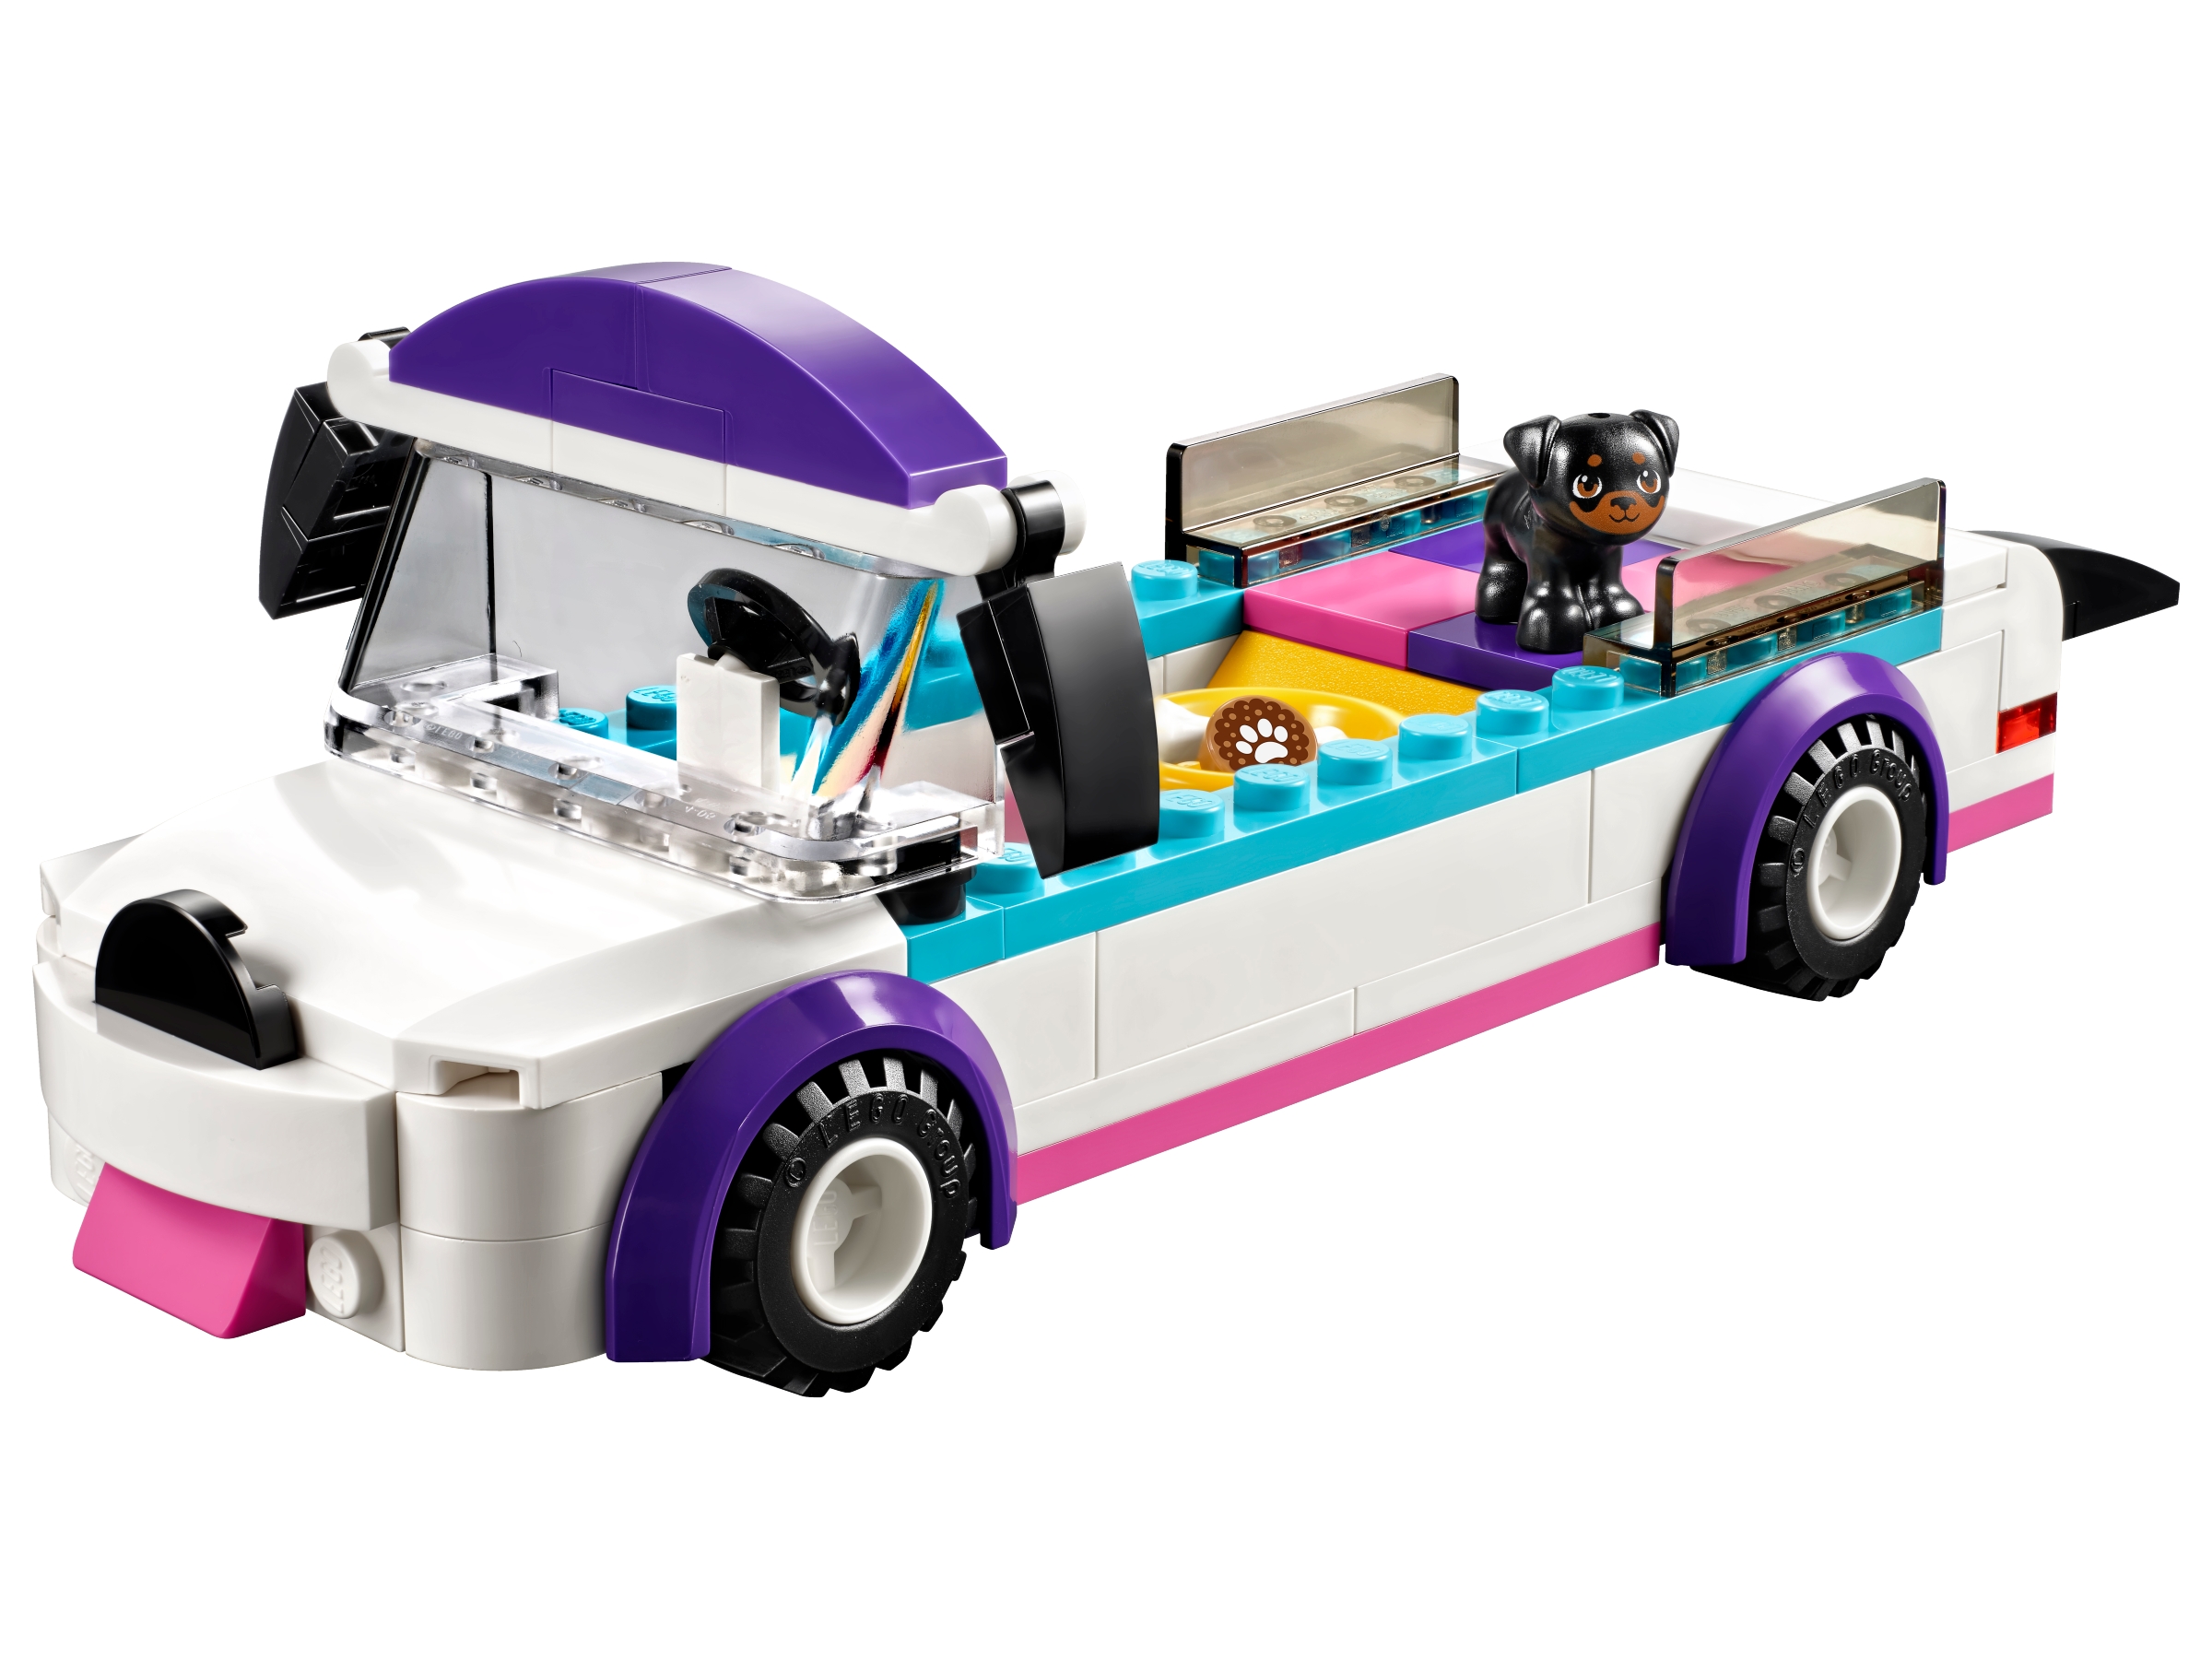 Puppy Parade 41301 | Friends | Buy at the Official LEGO® Shop